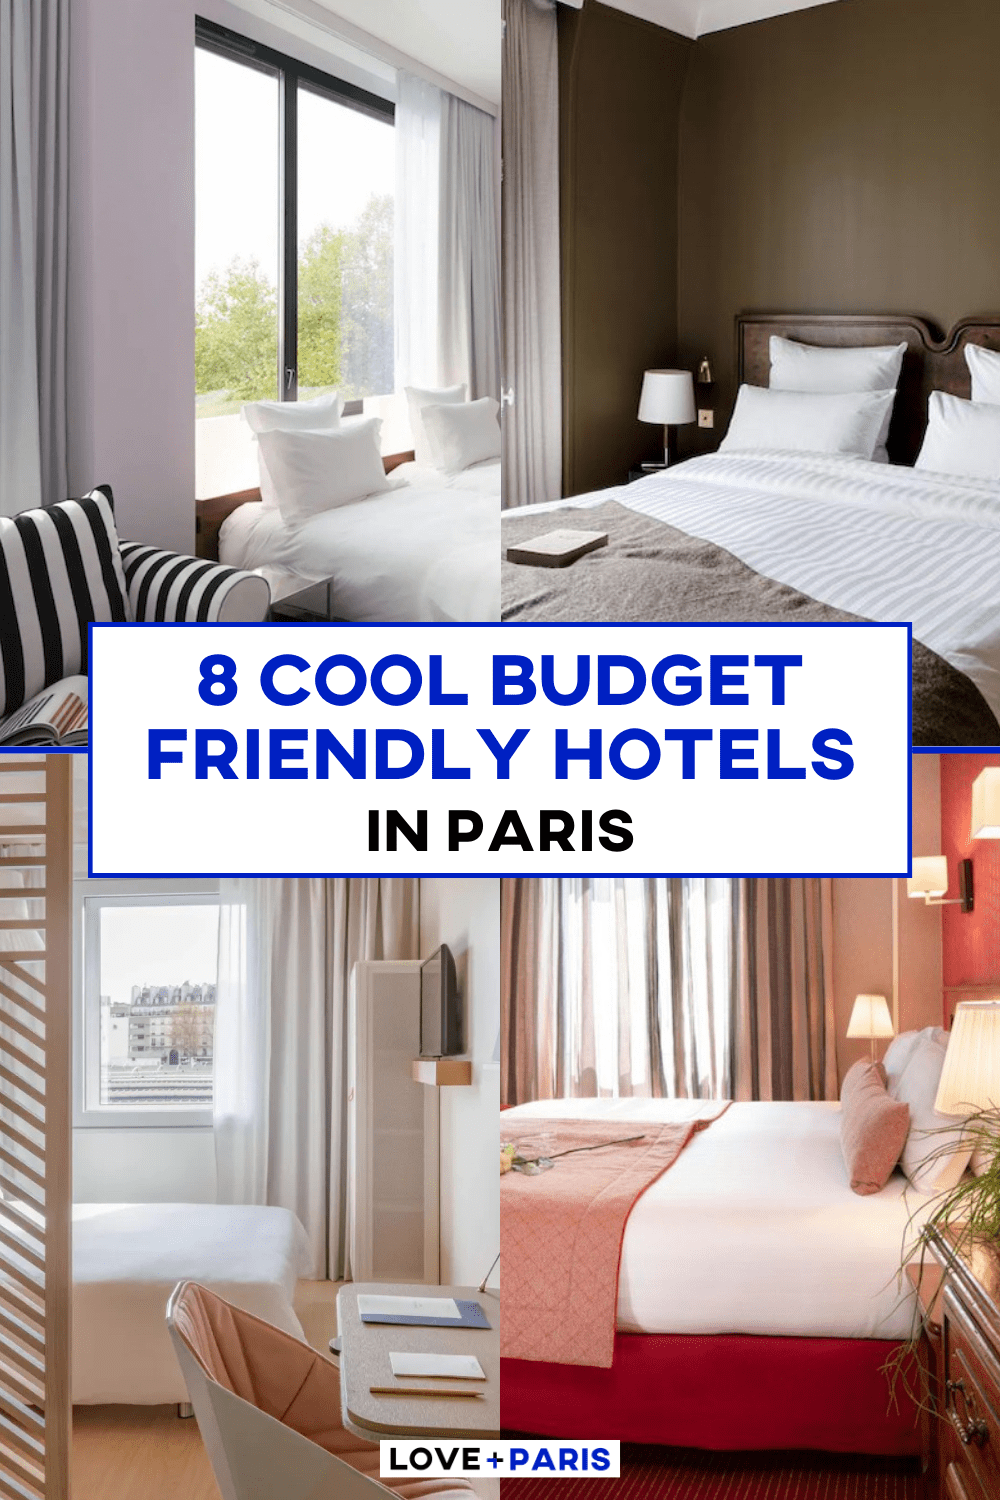 This is a pinterest pin or four hotel images comprised in a grid format.